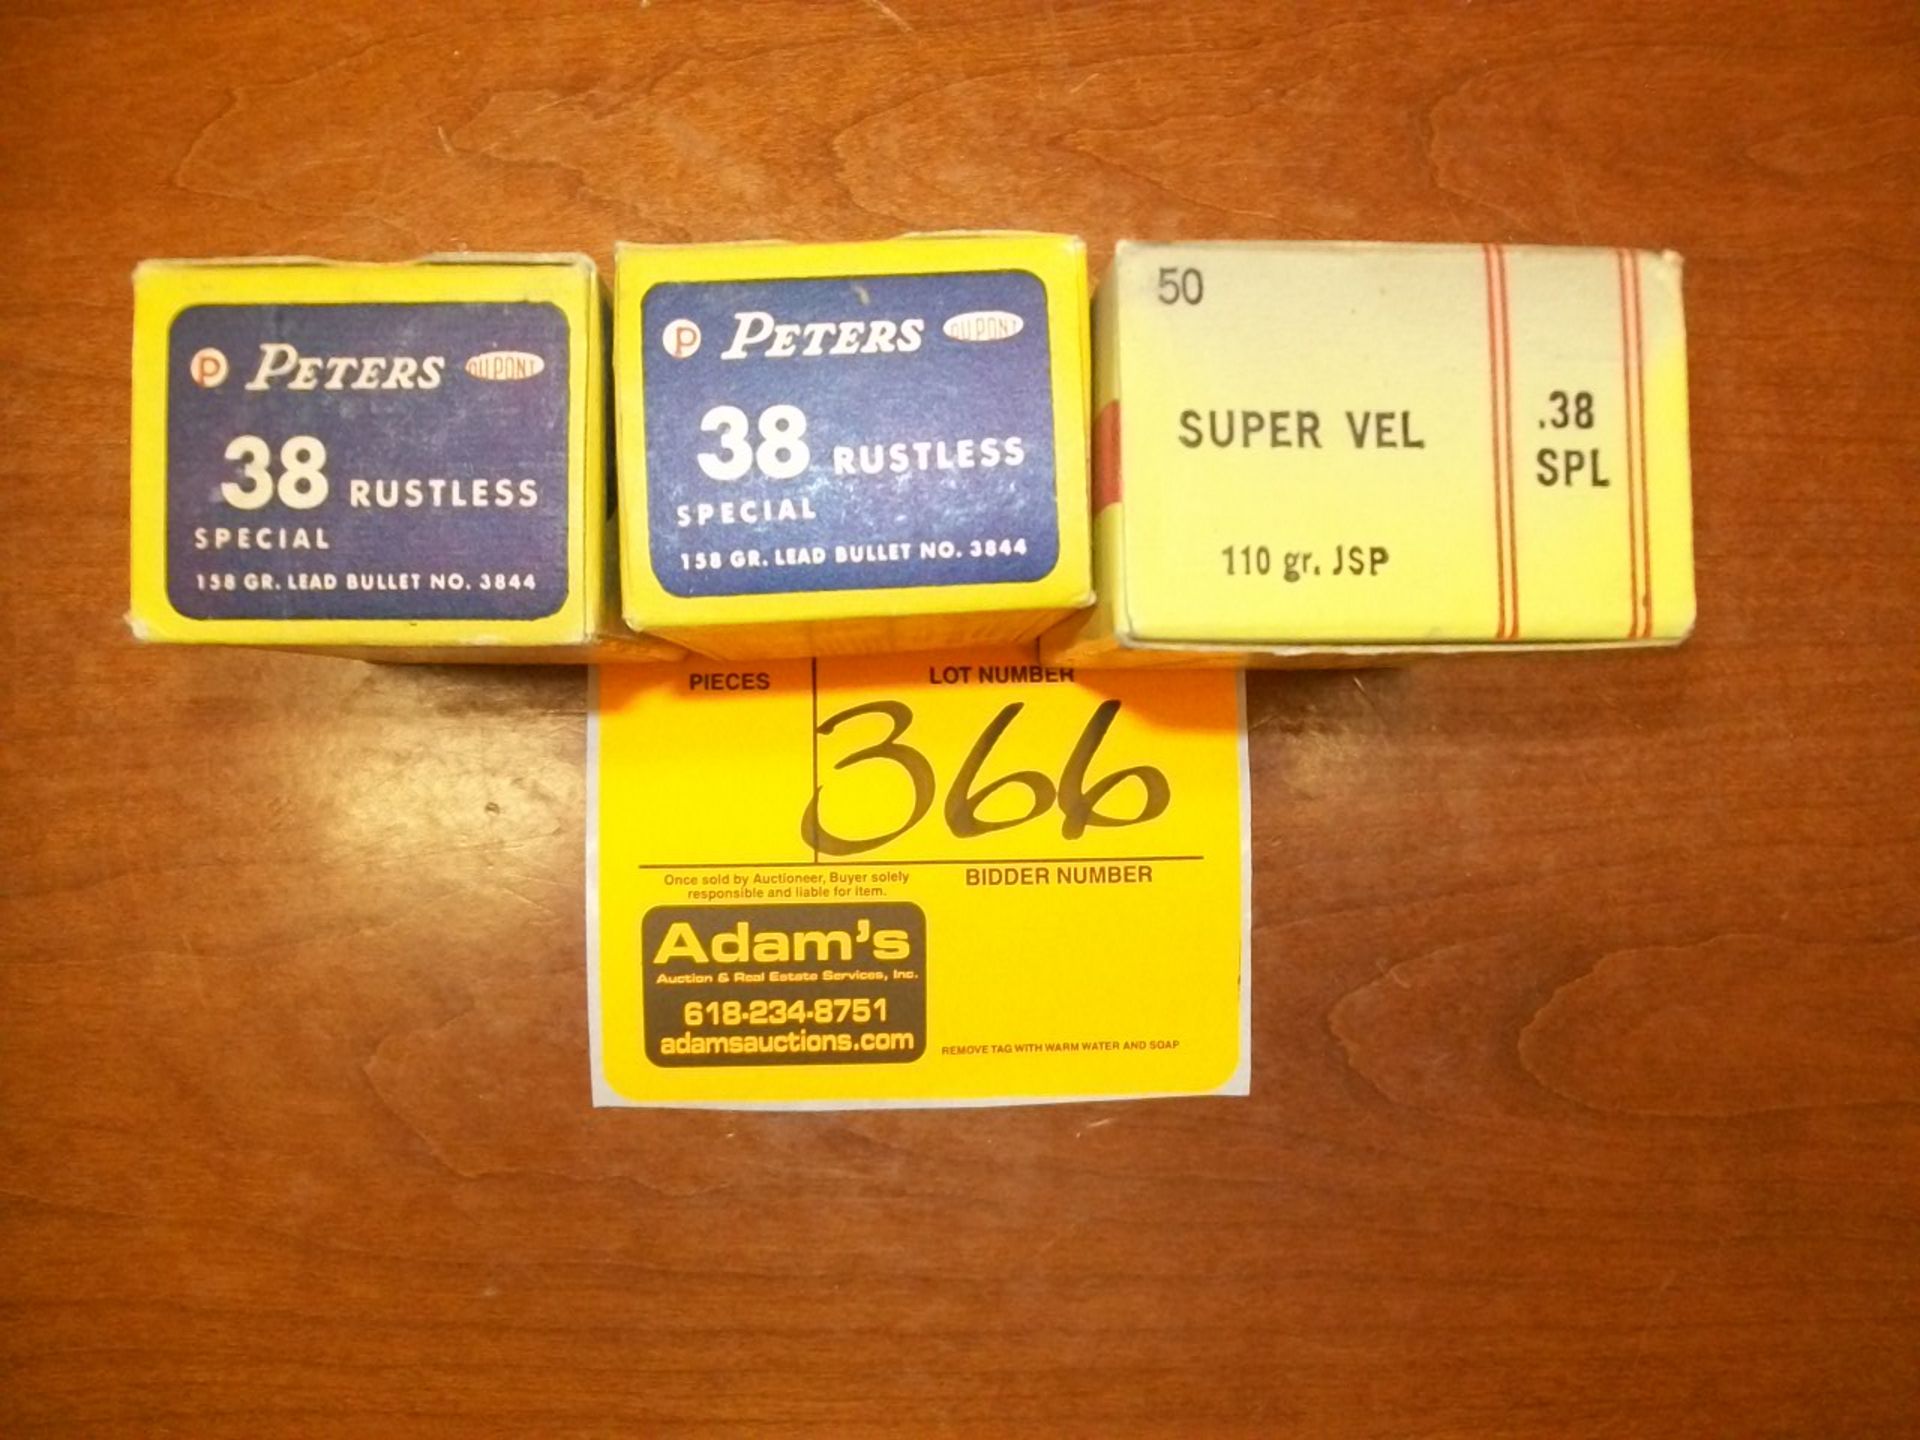 (2) PETERS 38 SPECIAL, (1) SUPER VEL. .38 SPECIAL